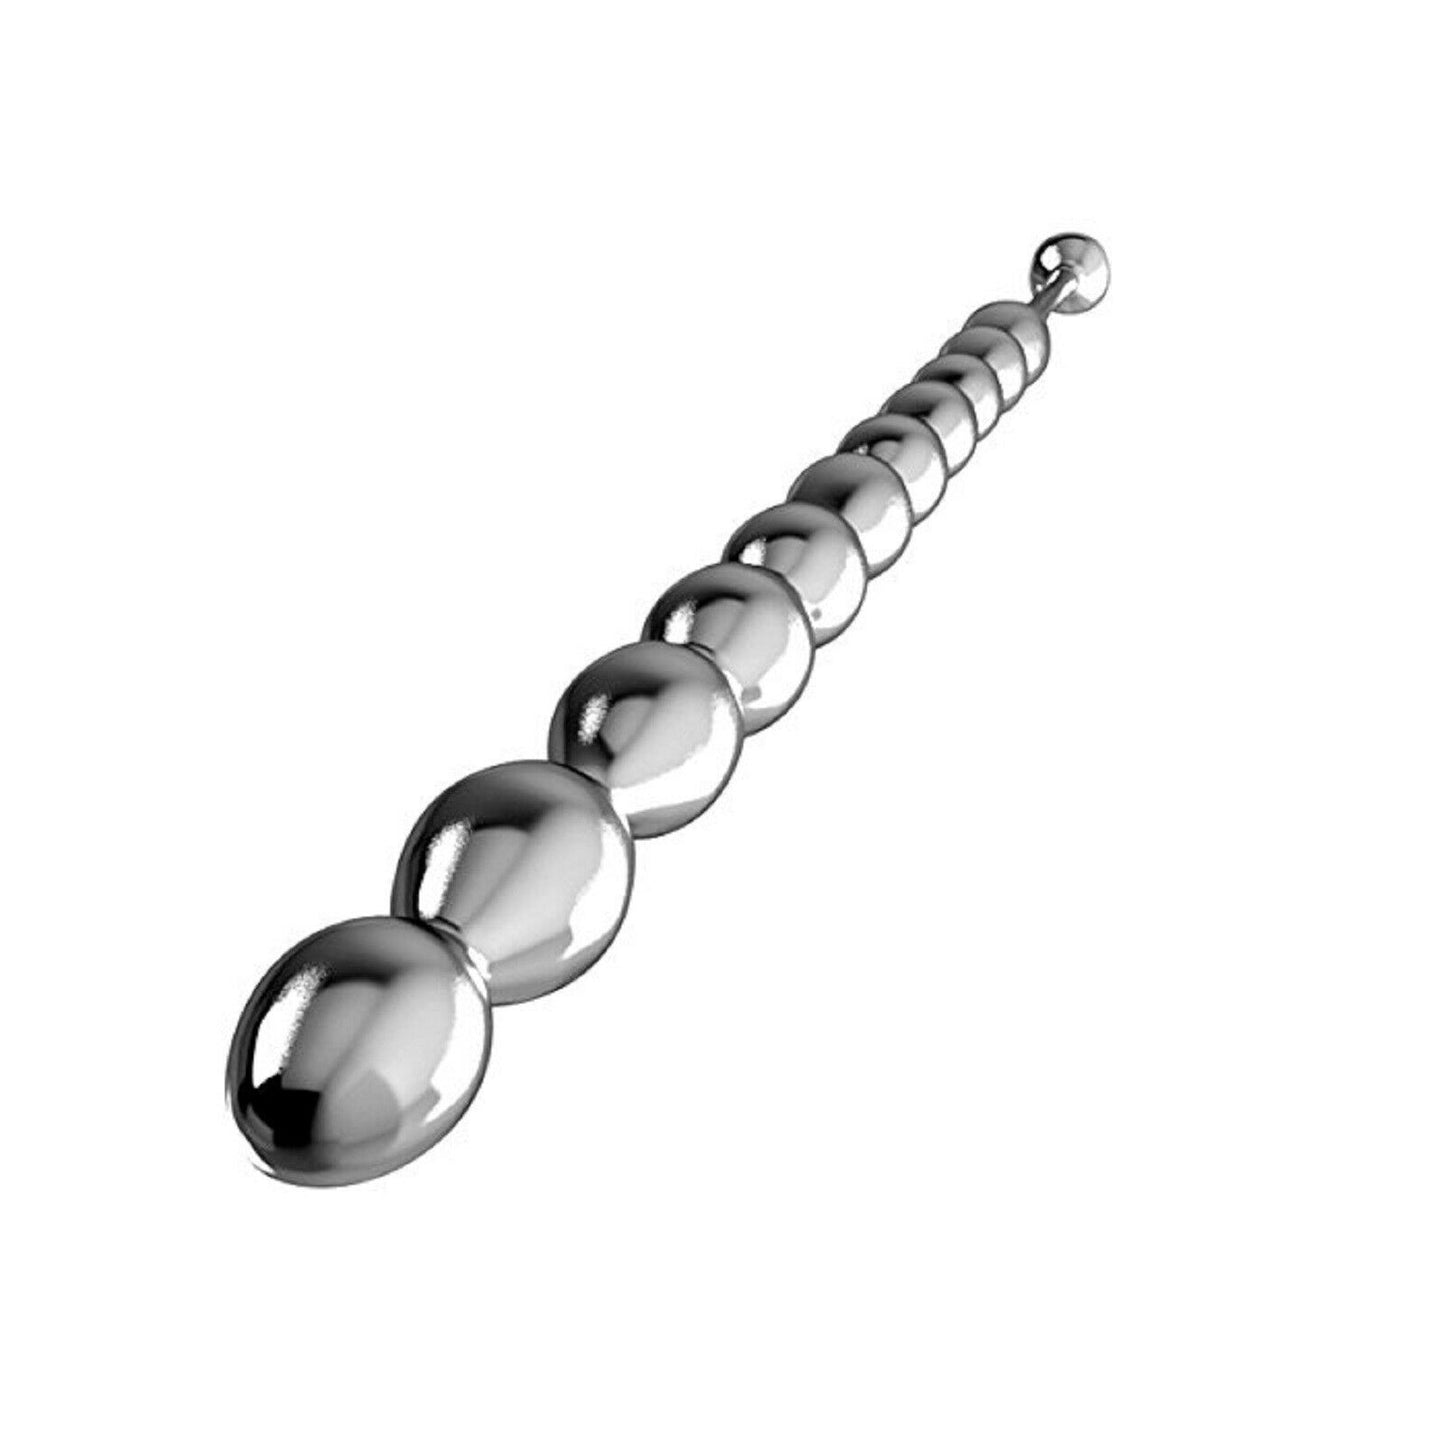 Stainless Steel Urethral Sound Ribbed Penis Plug Cock Catheter Rod Sex Toy NEW